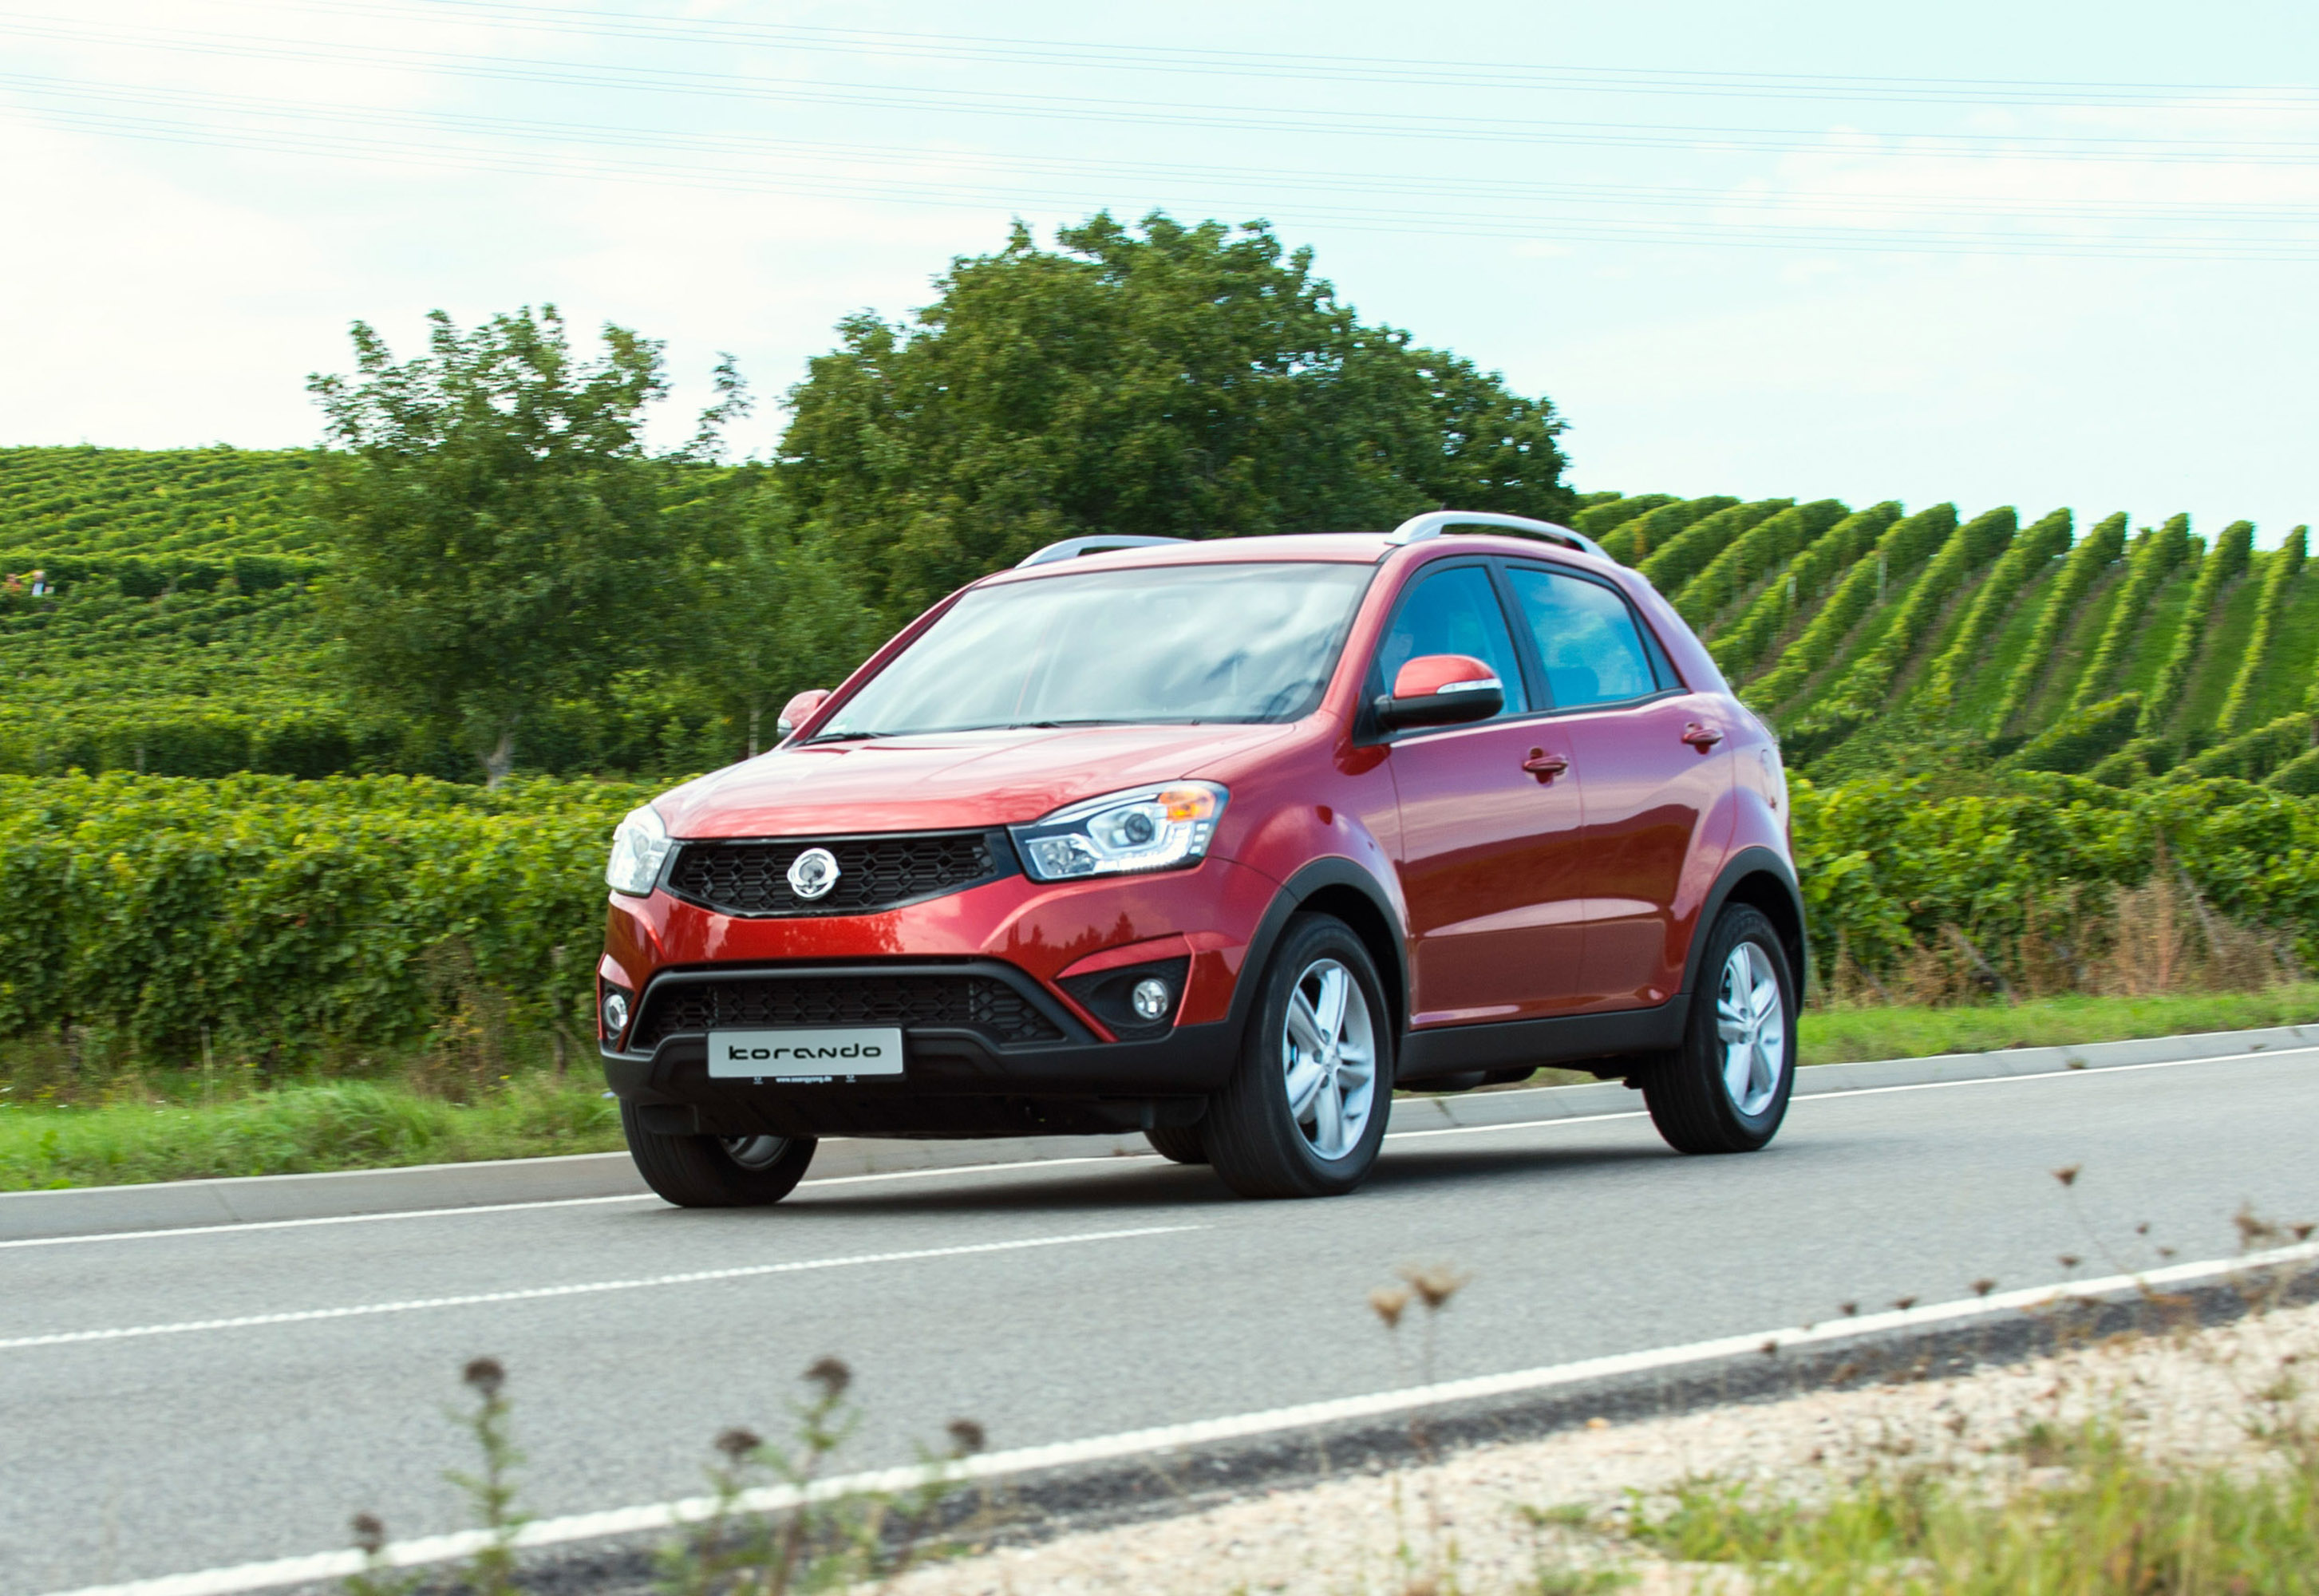 2014 SsangYong Korando - Full Details and Pricing